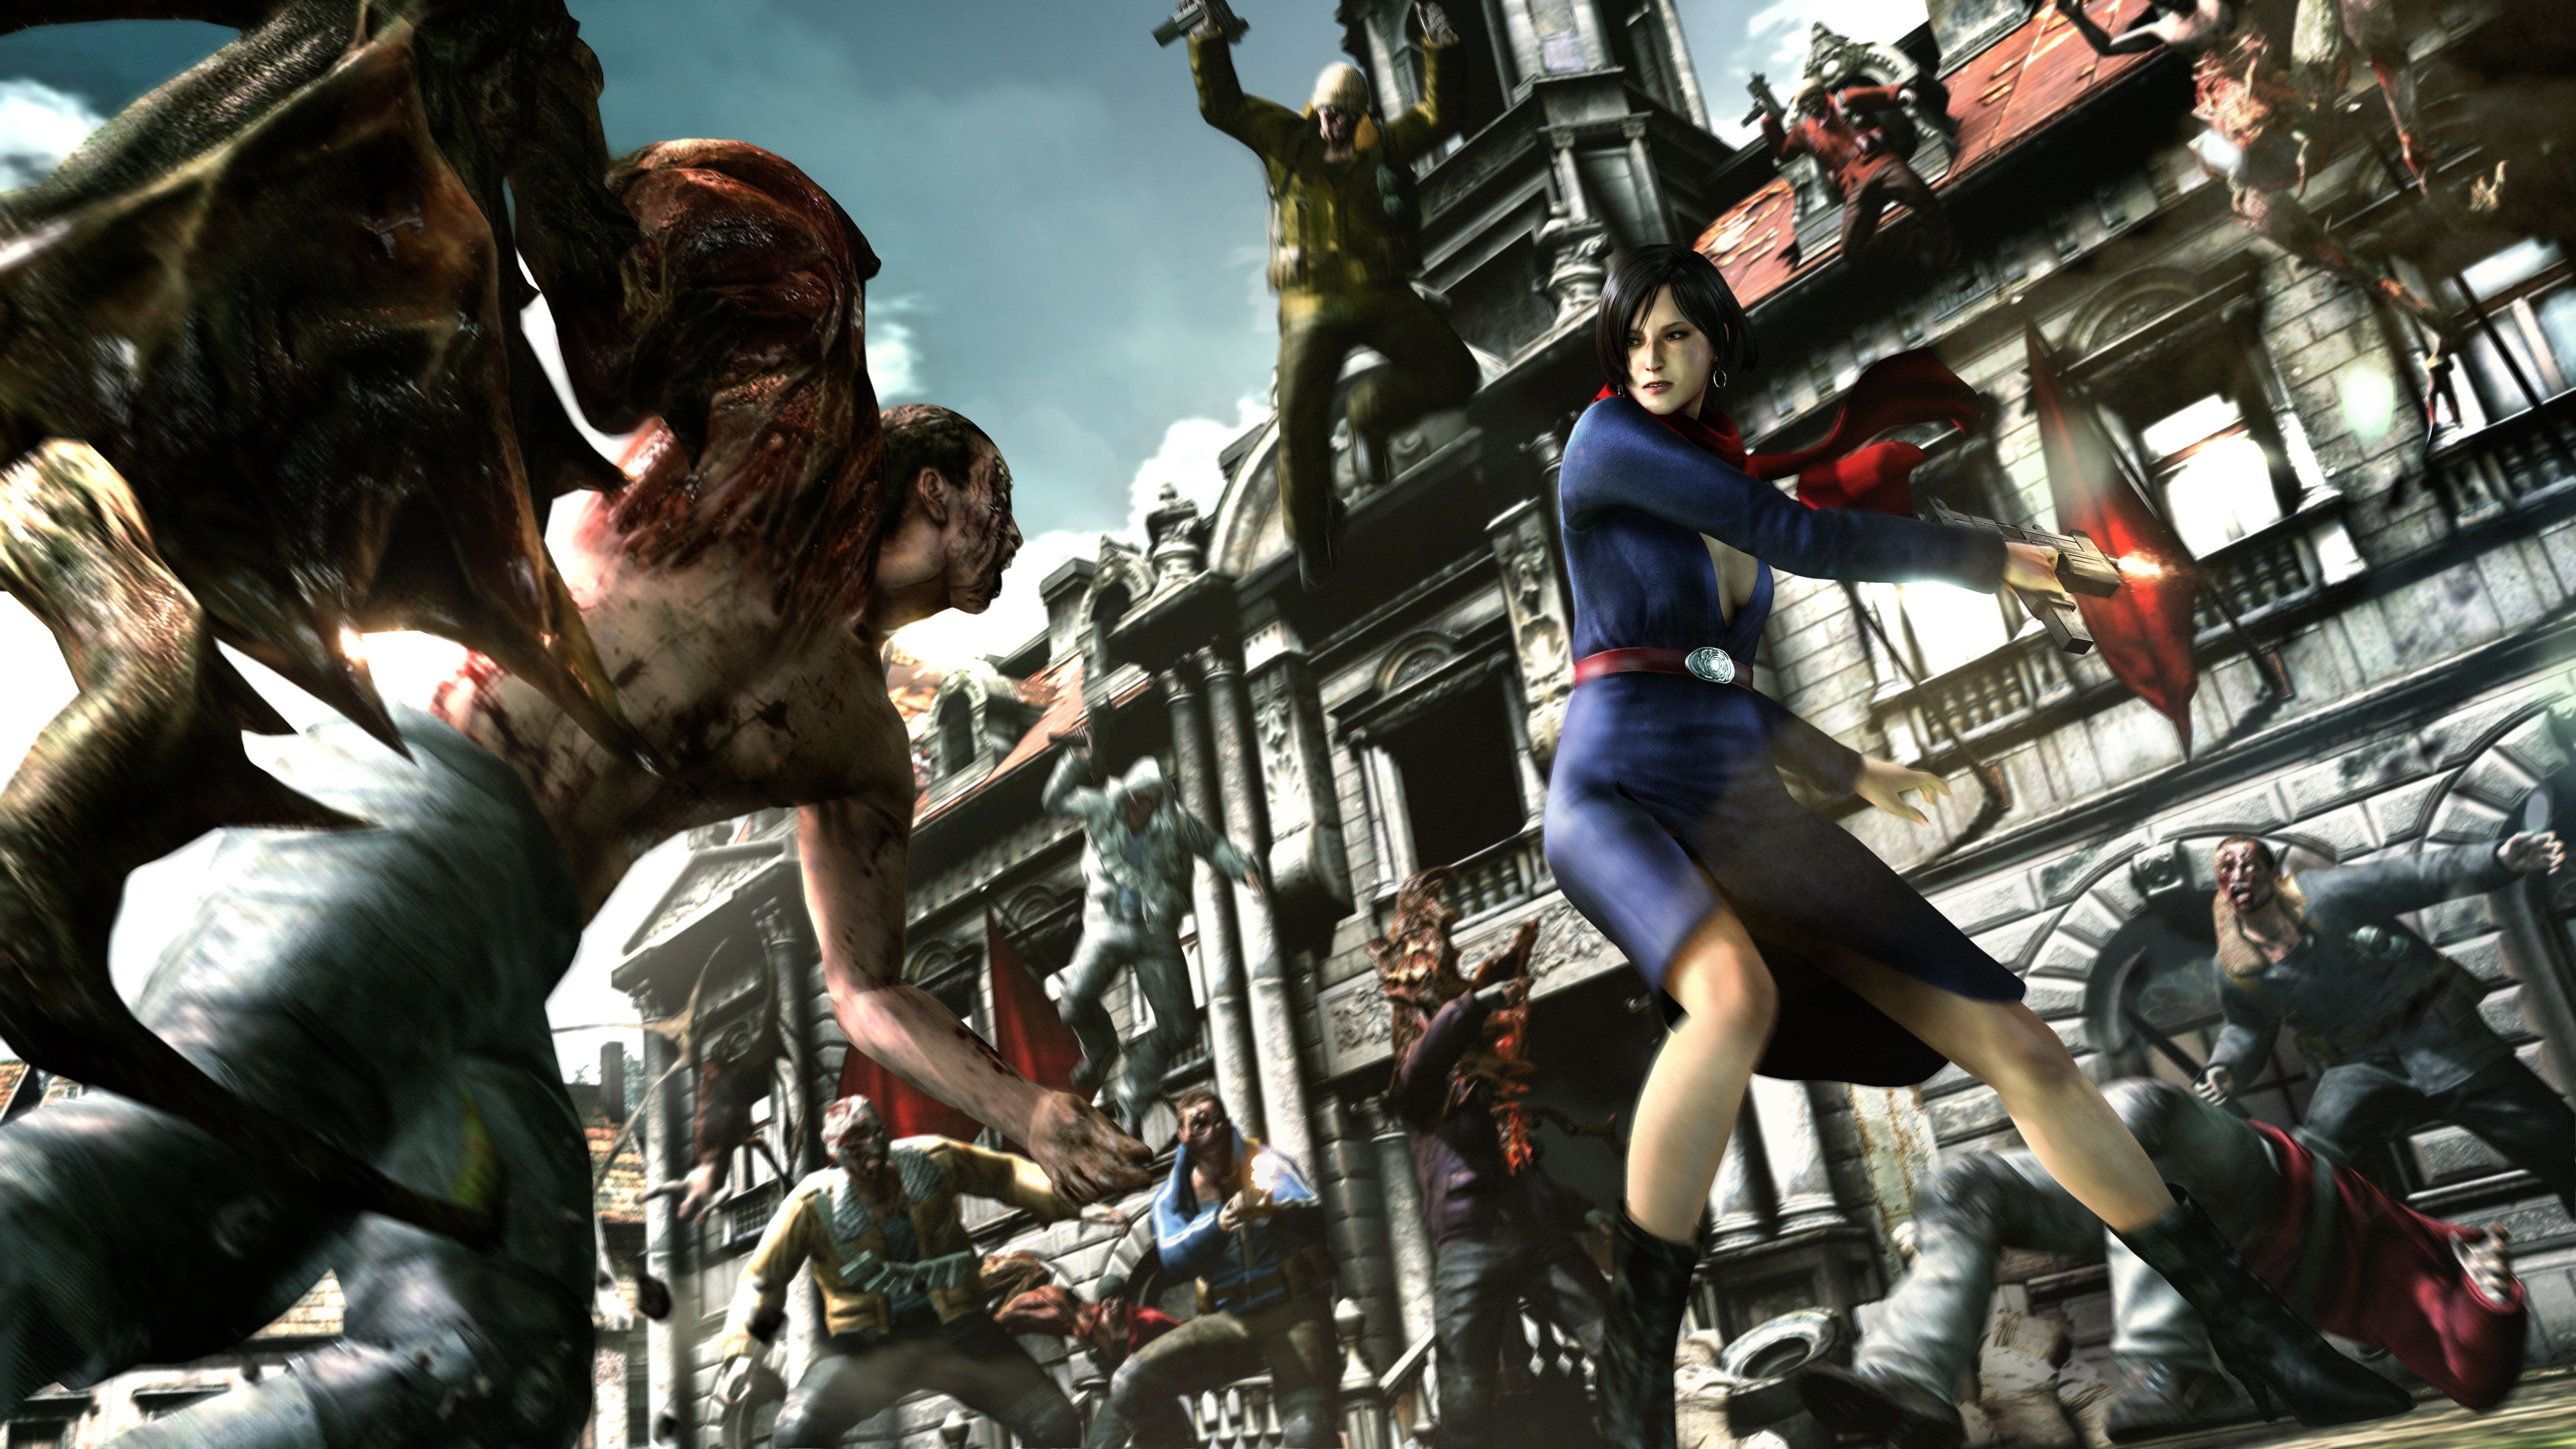 General 5120x2880 Resident Evil 6 Ada Wong zombies Resident Evil undead video game girls video games video game characters Capcom